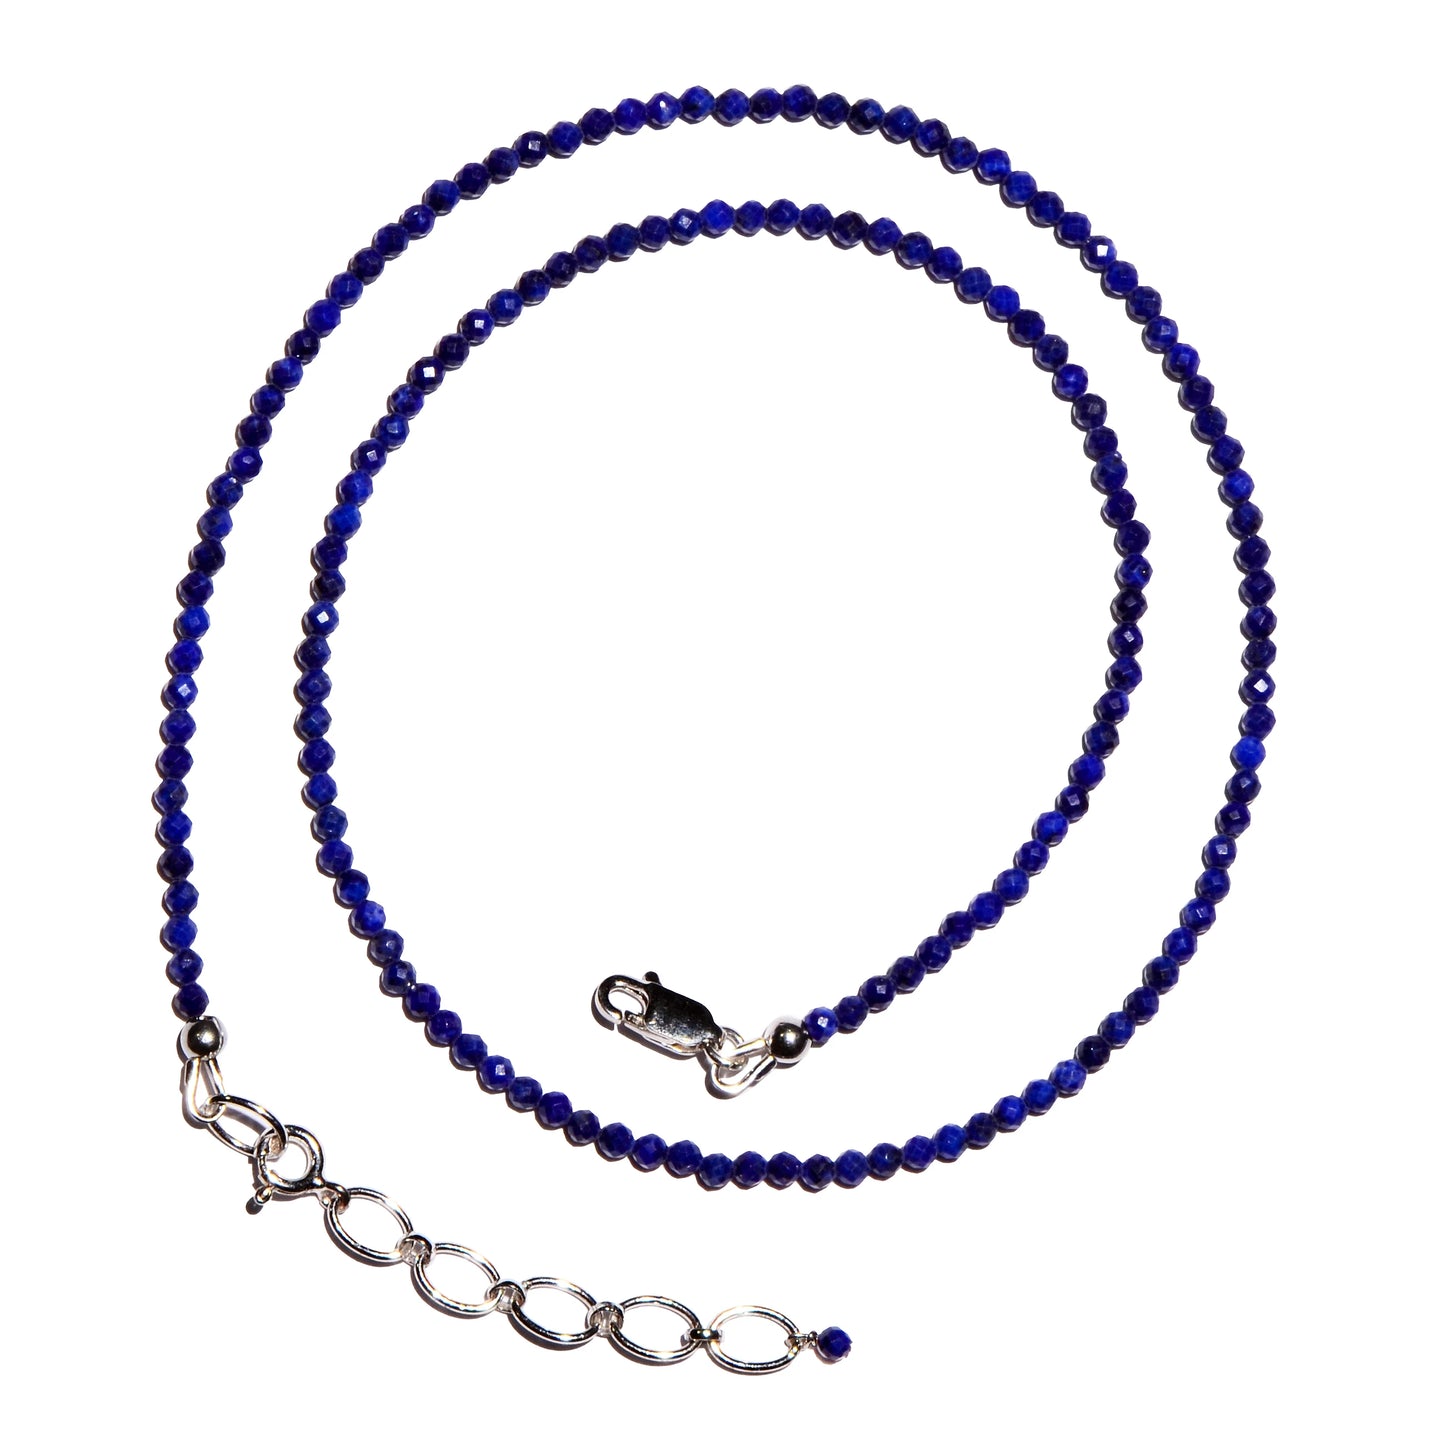 Buy Lapis Lazuli Faceted MIcrobead Necklace 2.5mm for the stone of Truth